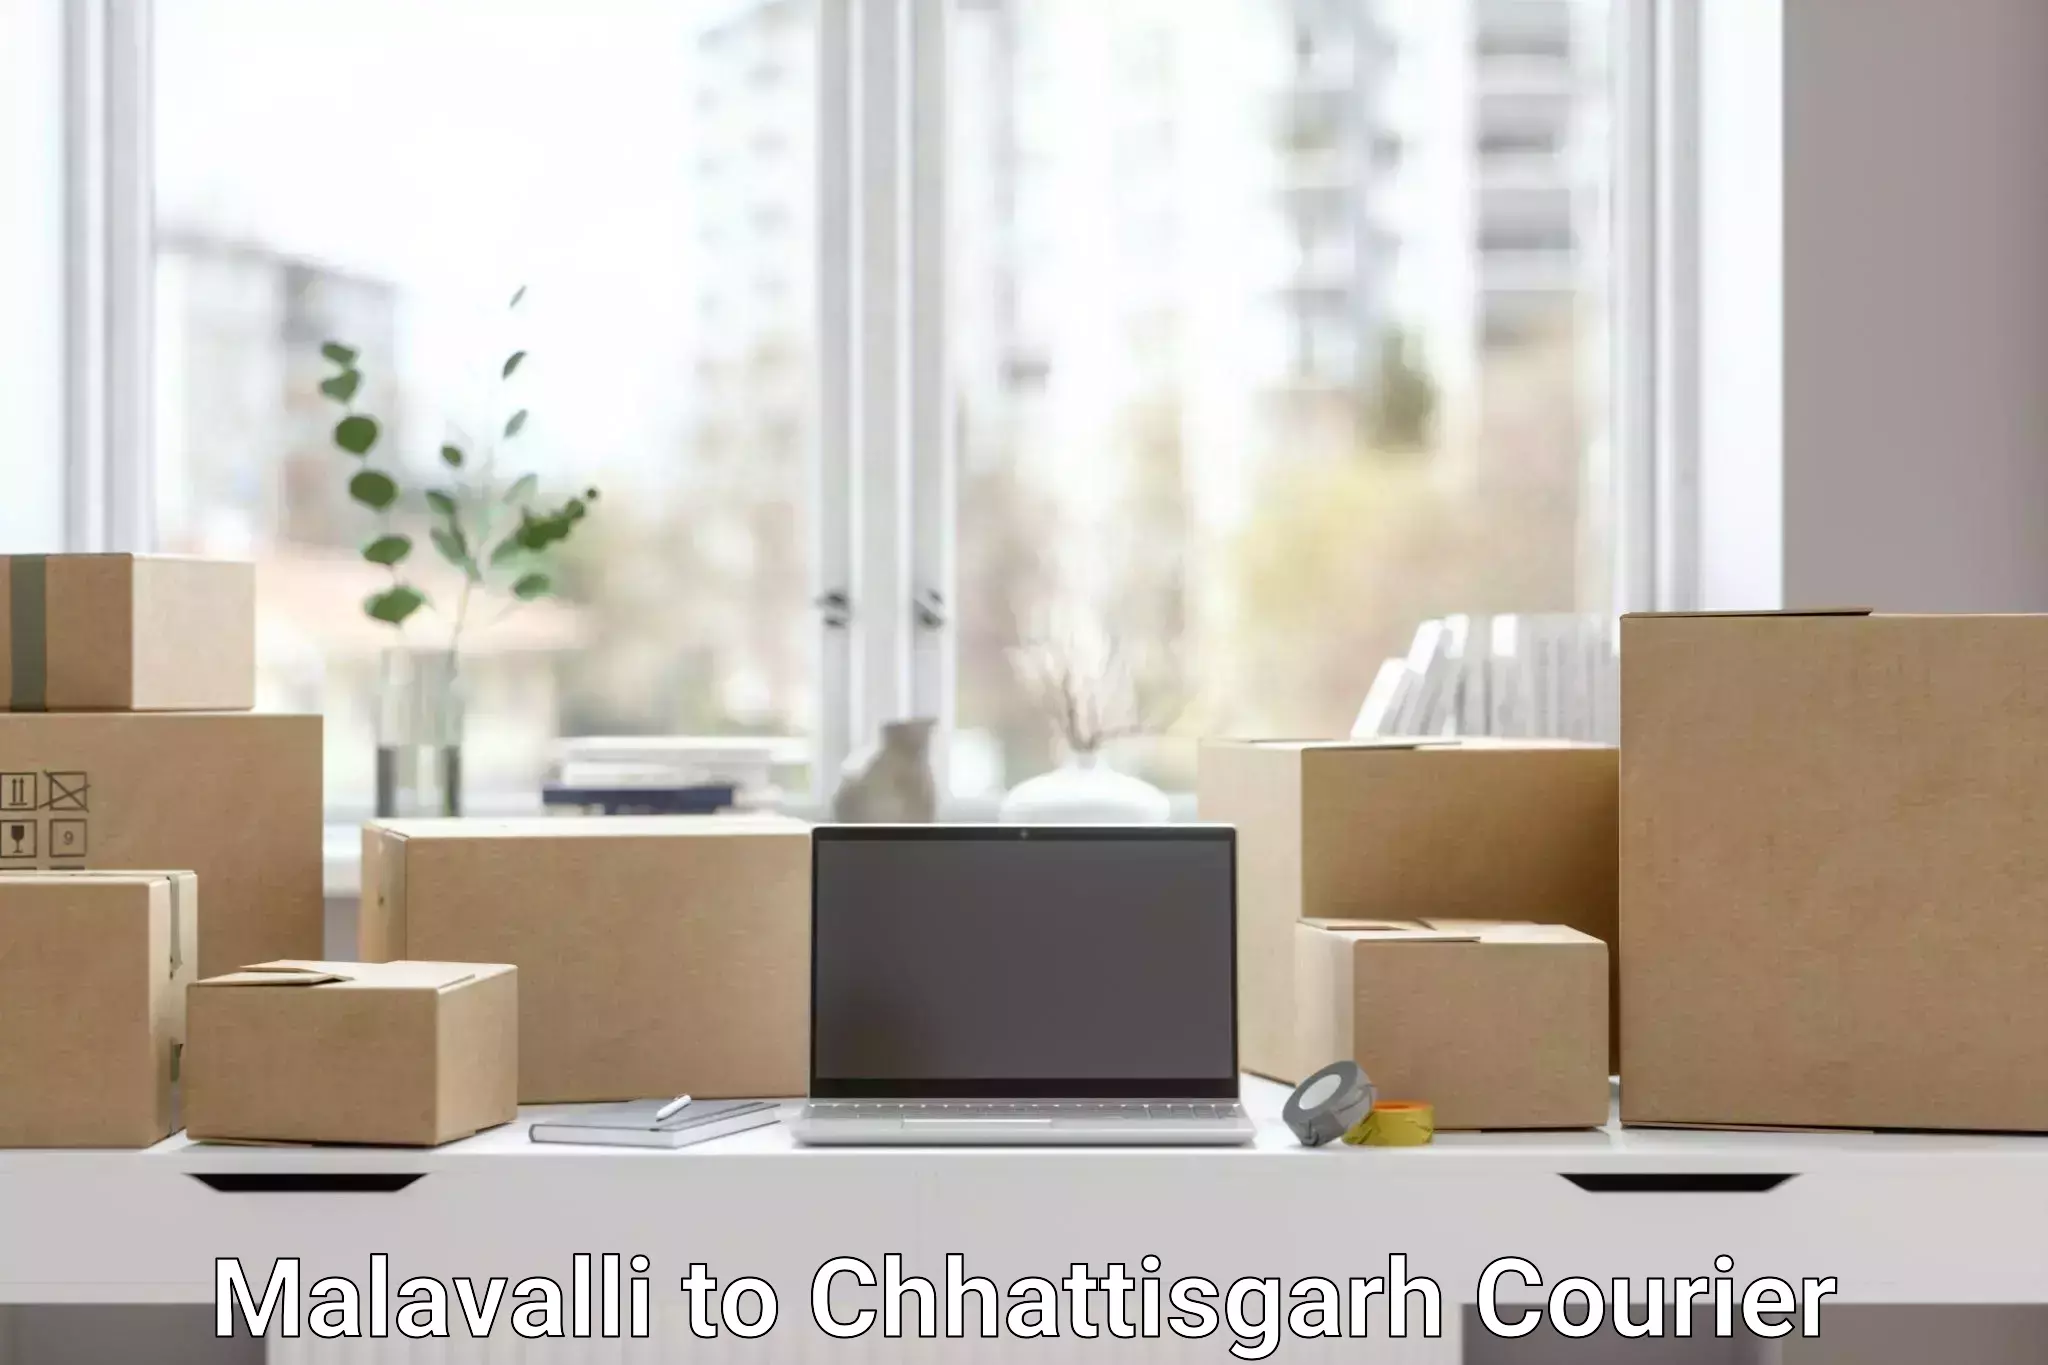 Custom courier packaging in Malavalli to bagbahra